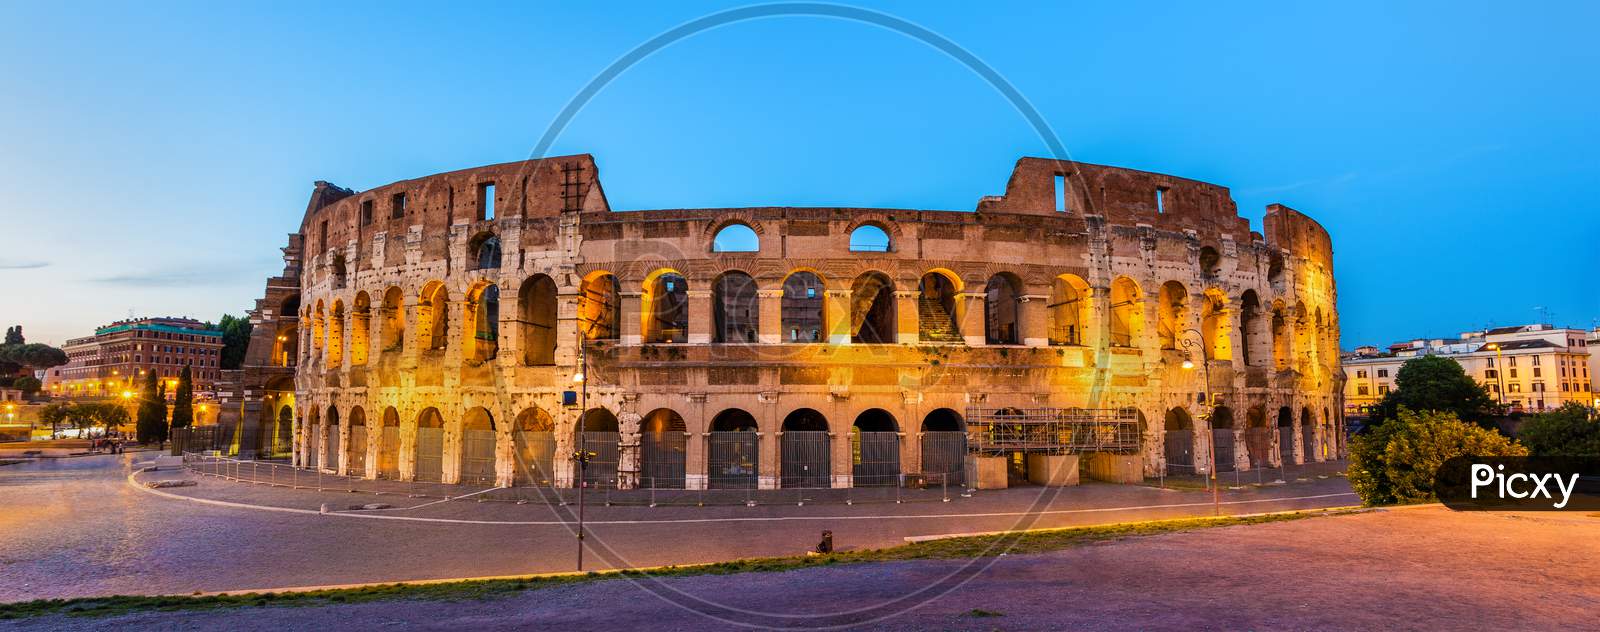 Evening View Of The Colosseum In Rome